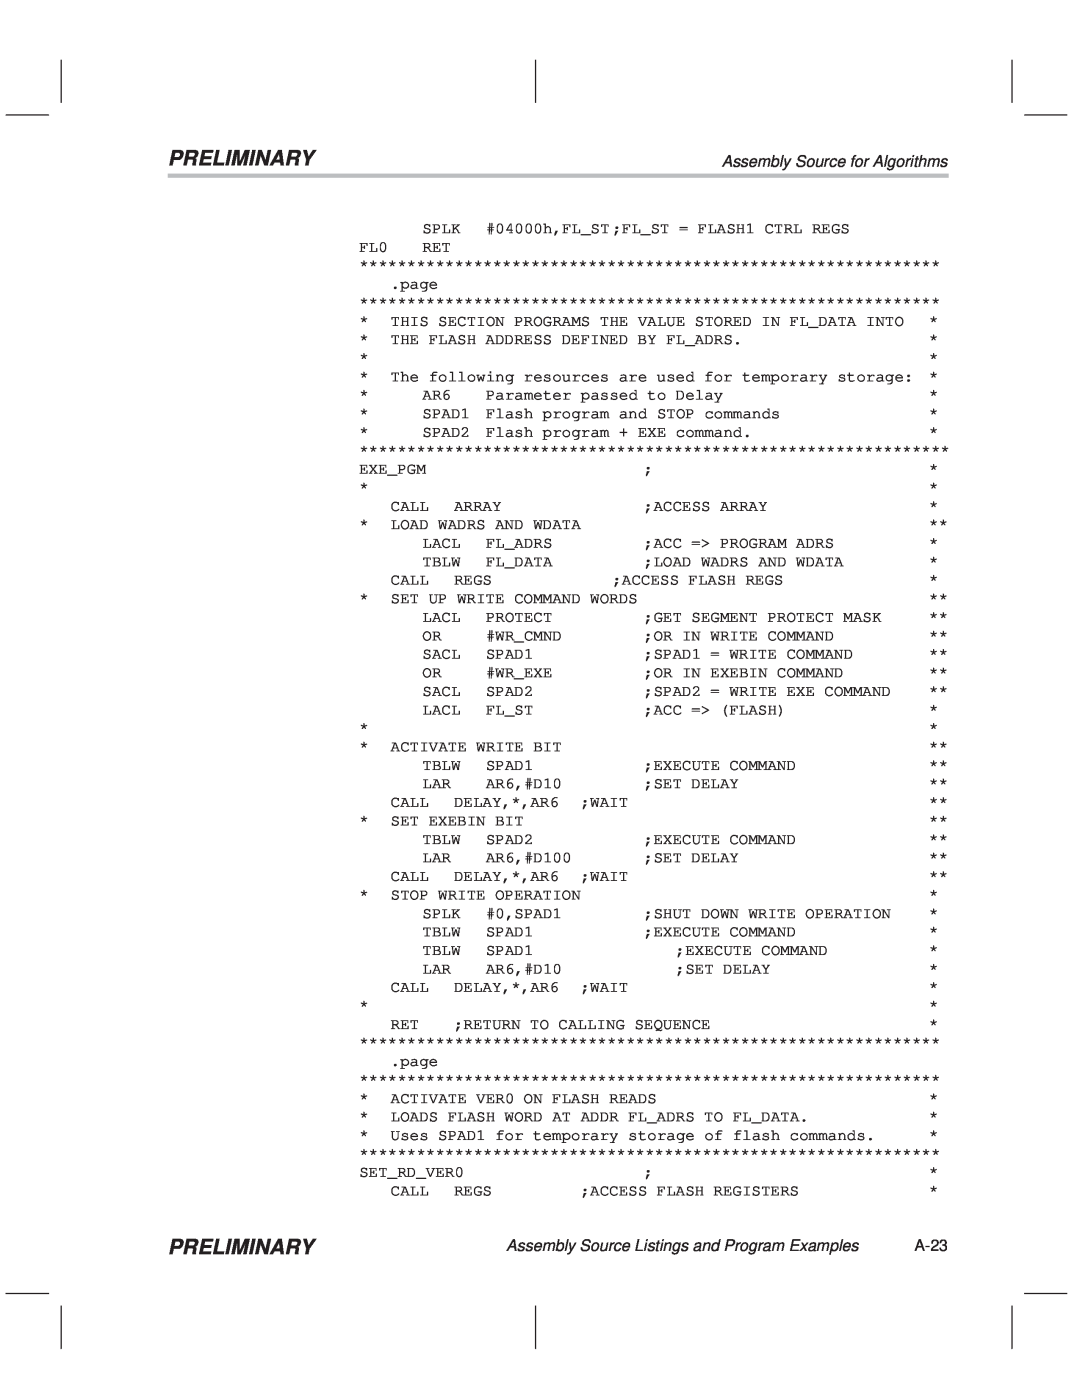 Texas Instruments TMS320F20x/F24x DSP manual Preliminary, Assembly Source for Algorithms, A-23 